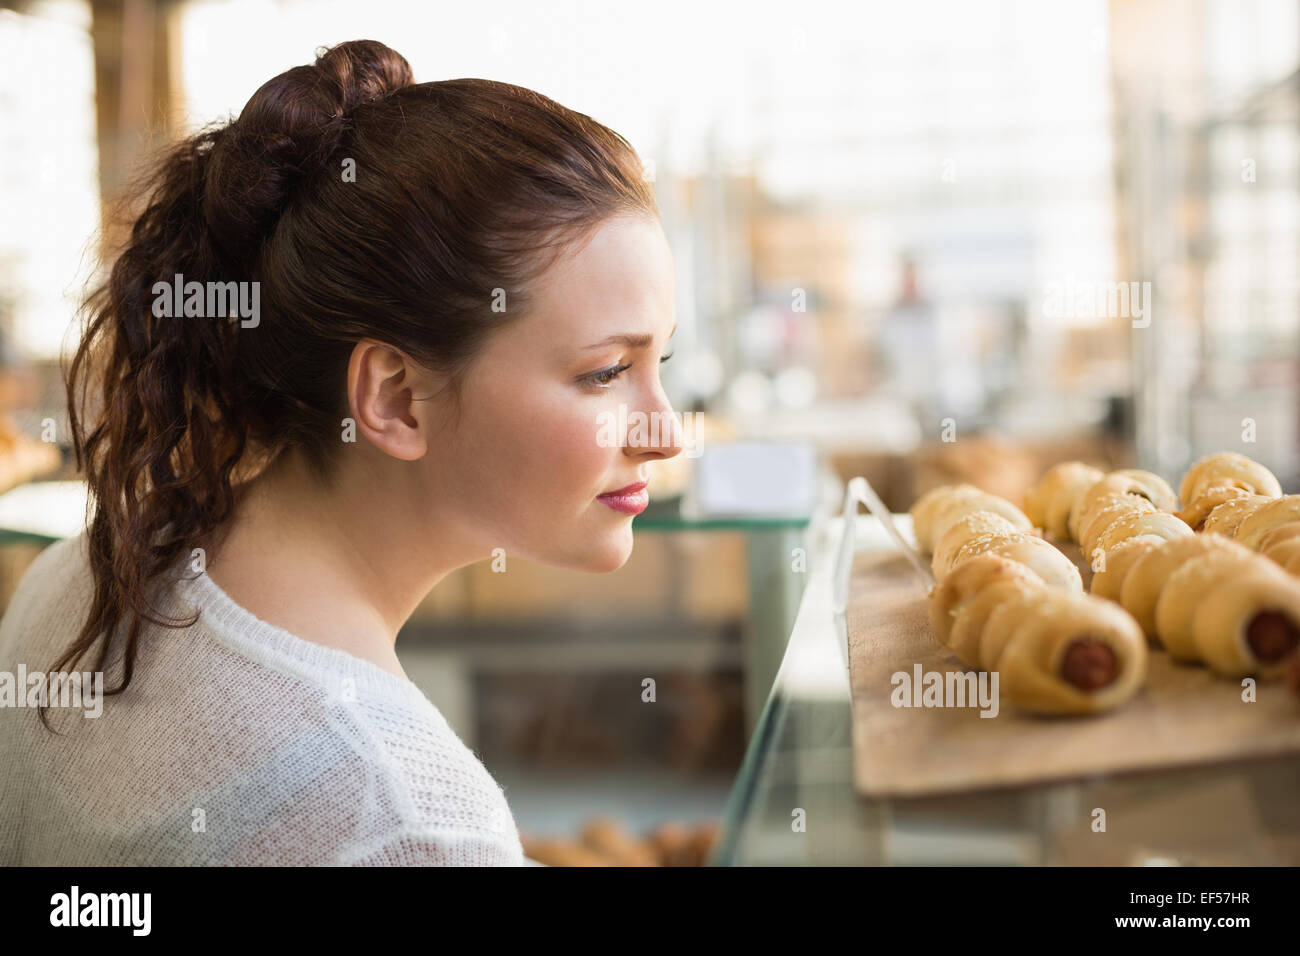 Woman eyeing up tray of pastrys Stock Photo